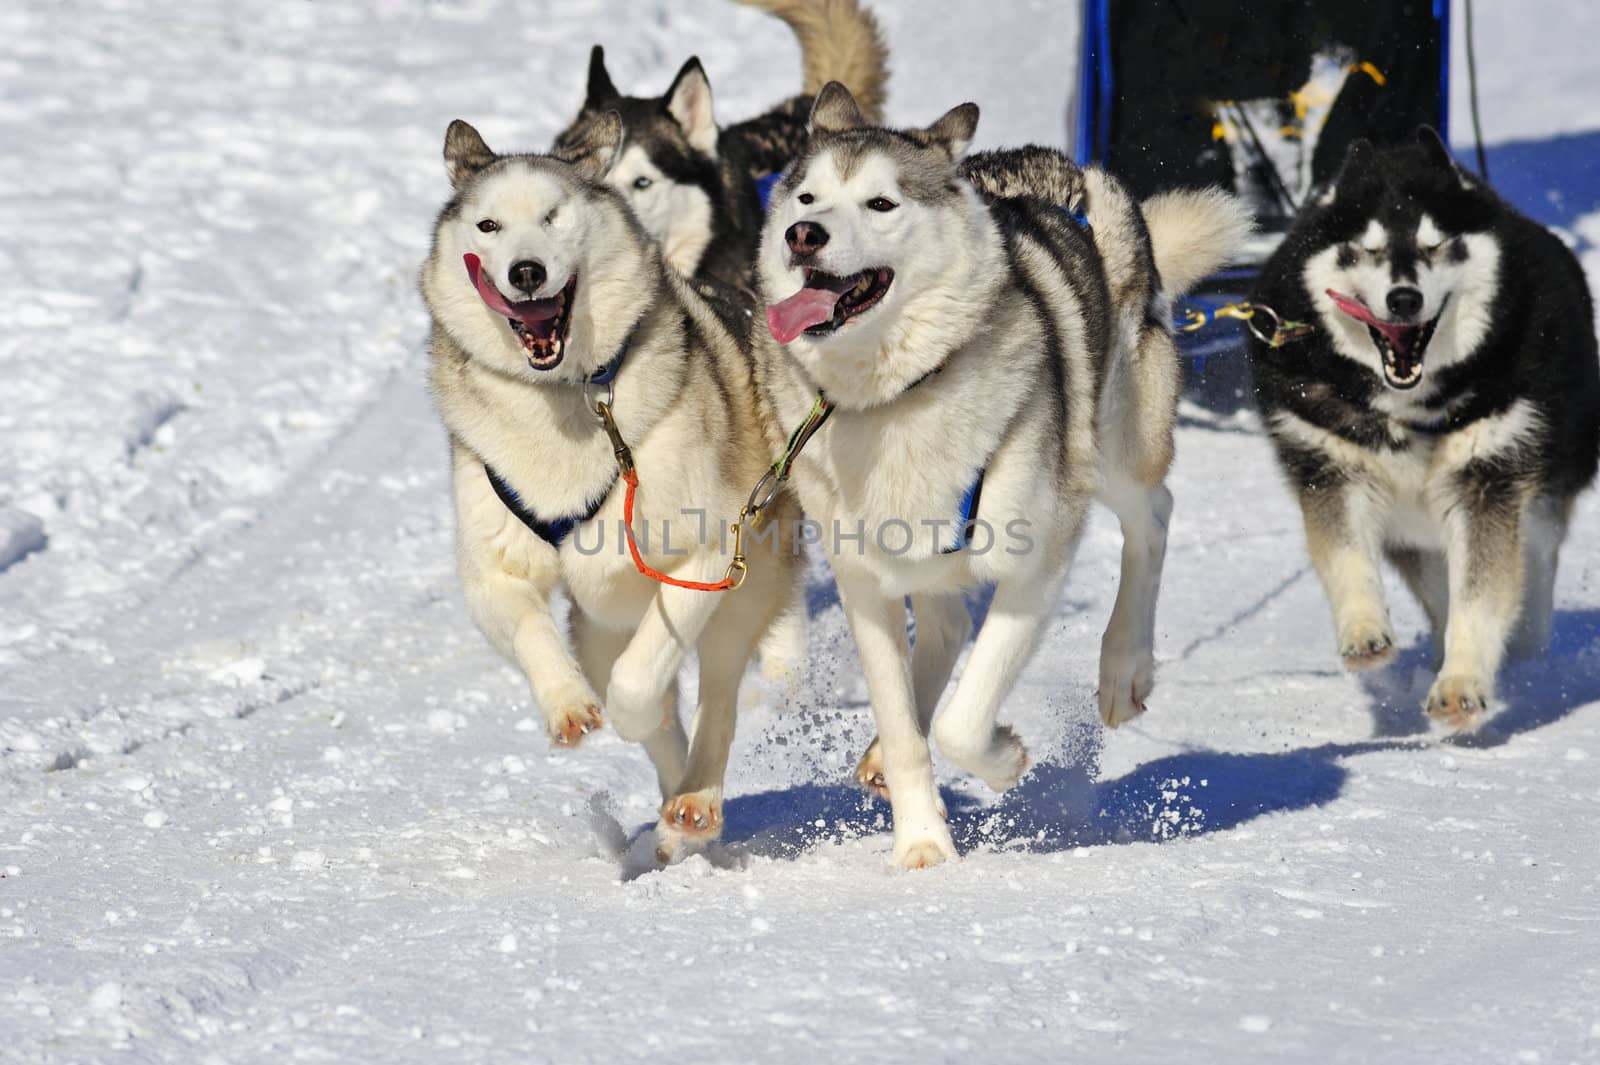 Team of Malamute sled dogs in action.  by Bateleur